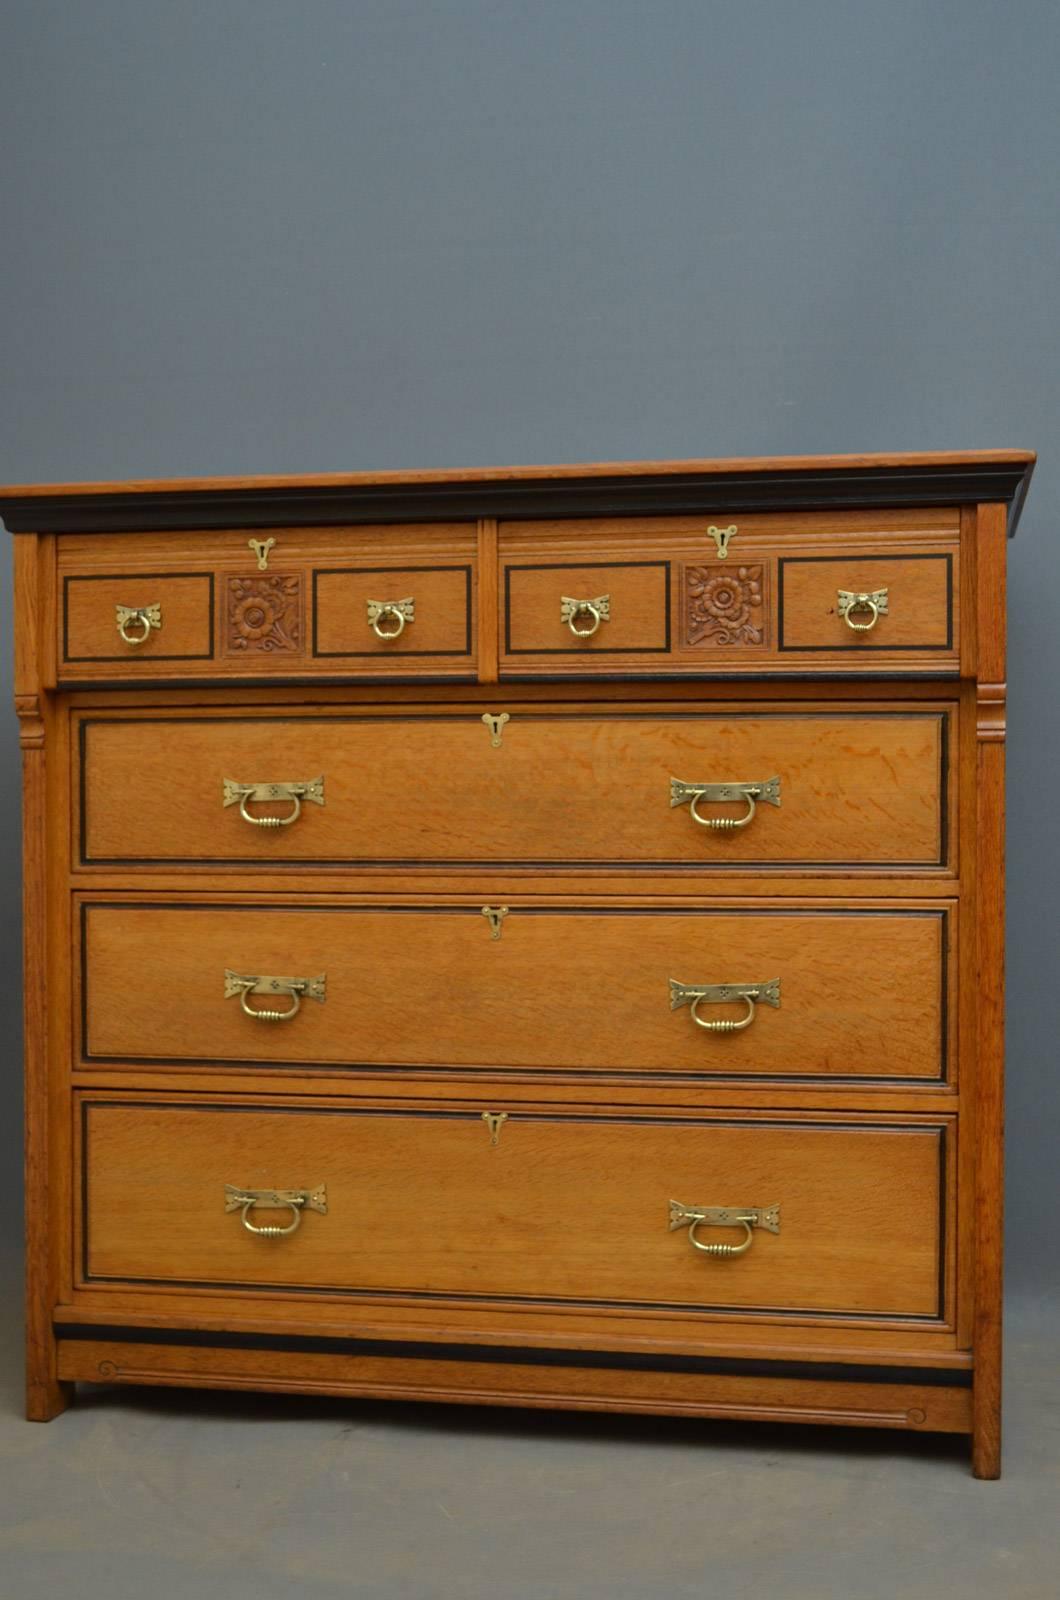 Aesthetic Movement Victorian Oak and Ebonised Chest of Drawers by Lamb of Manchester